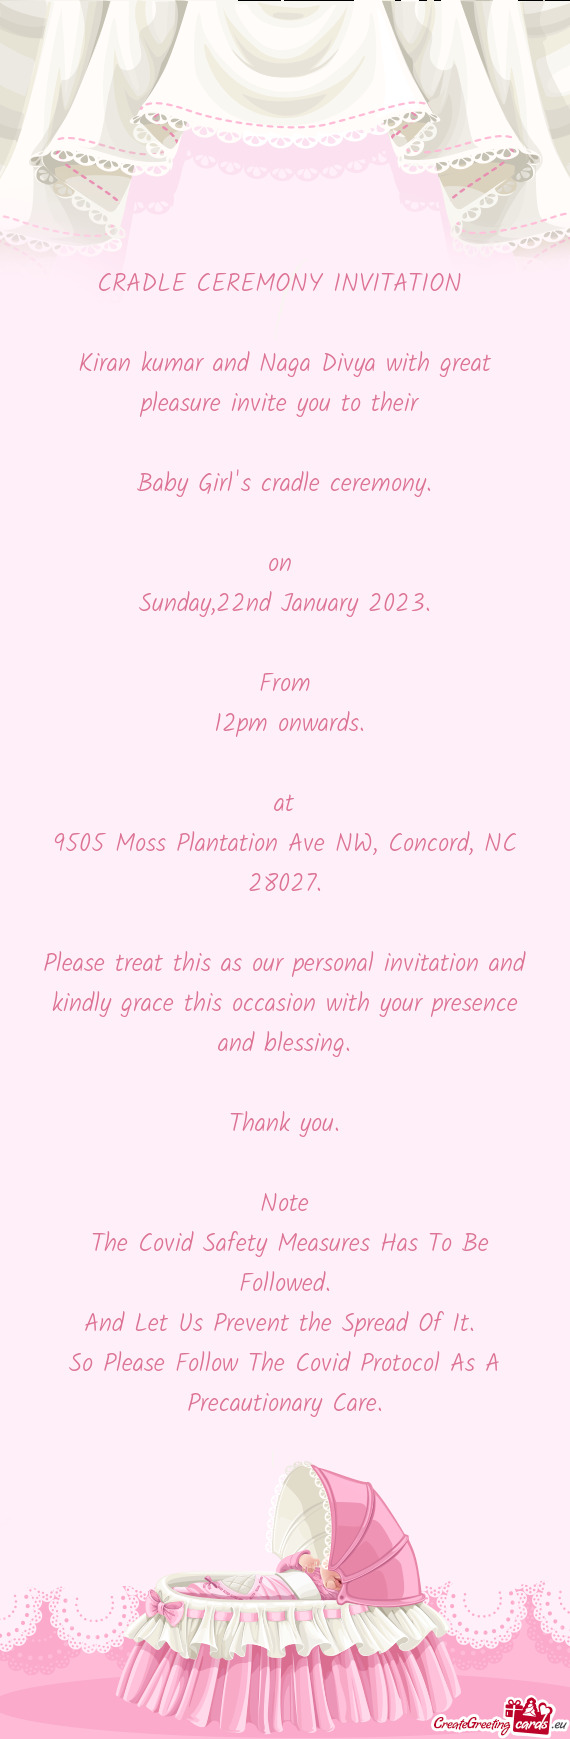 9505 Moss Plantation Ave NW, Concord, NC 28027